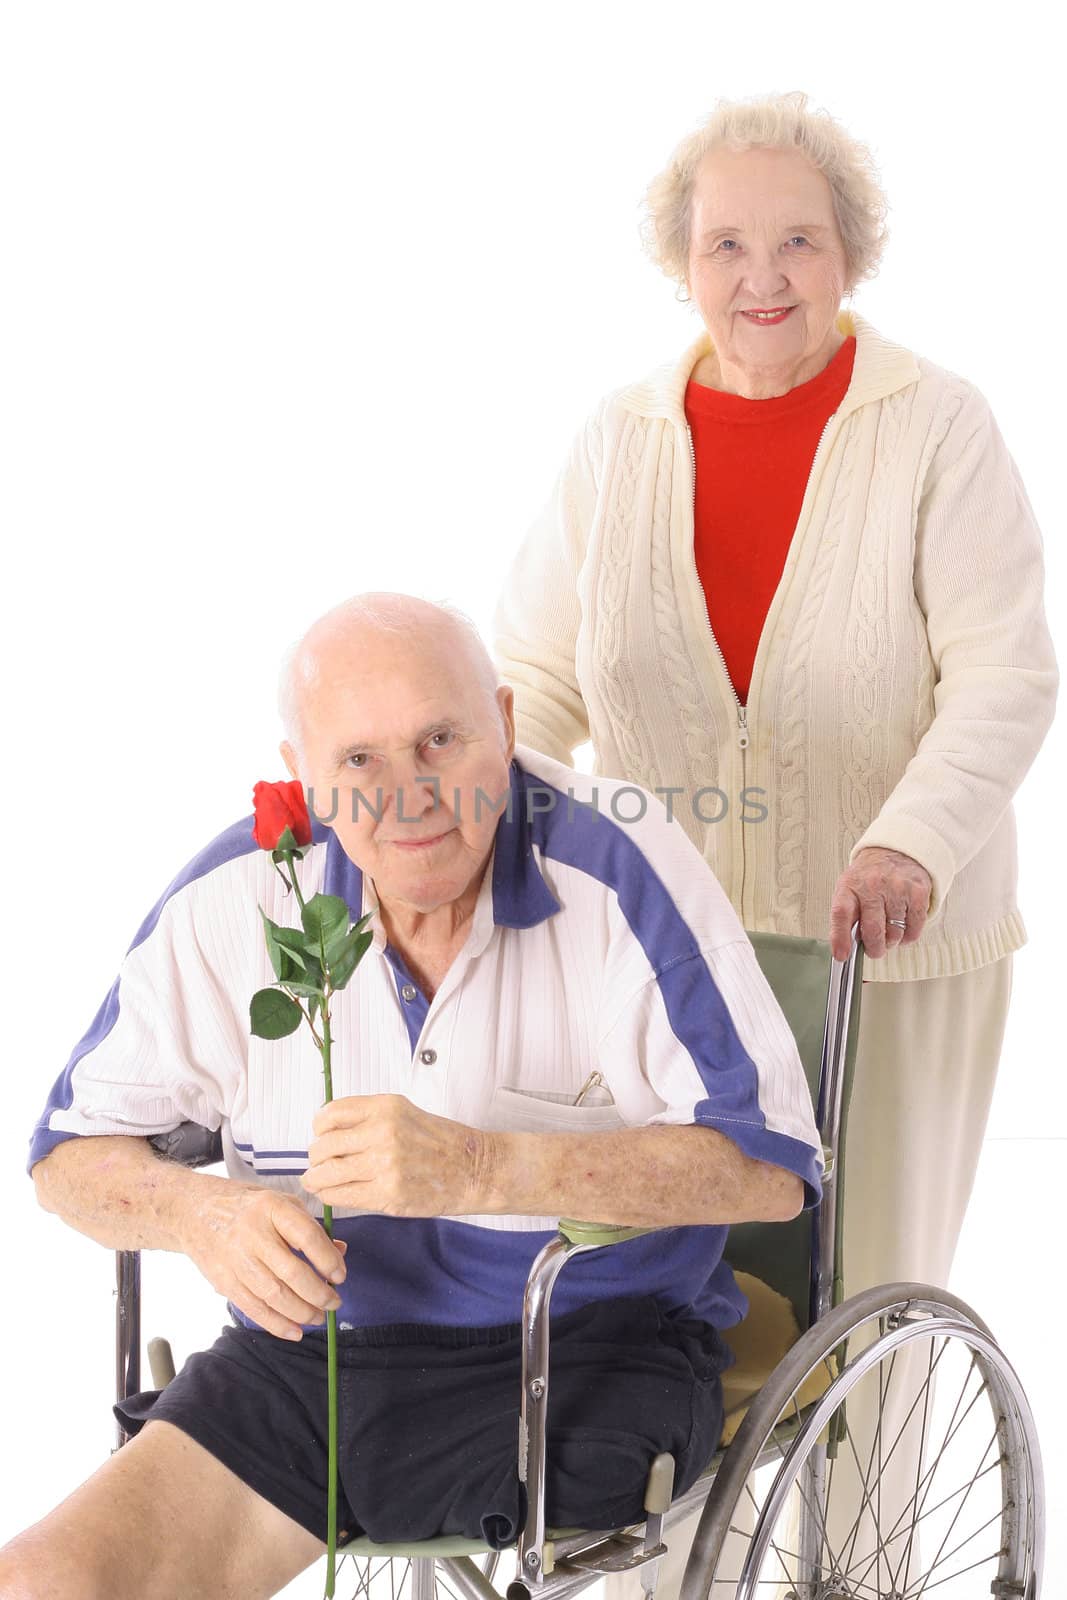 shot of a handicap senior with wife by creativestock